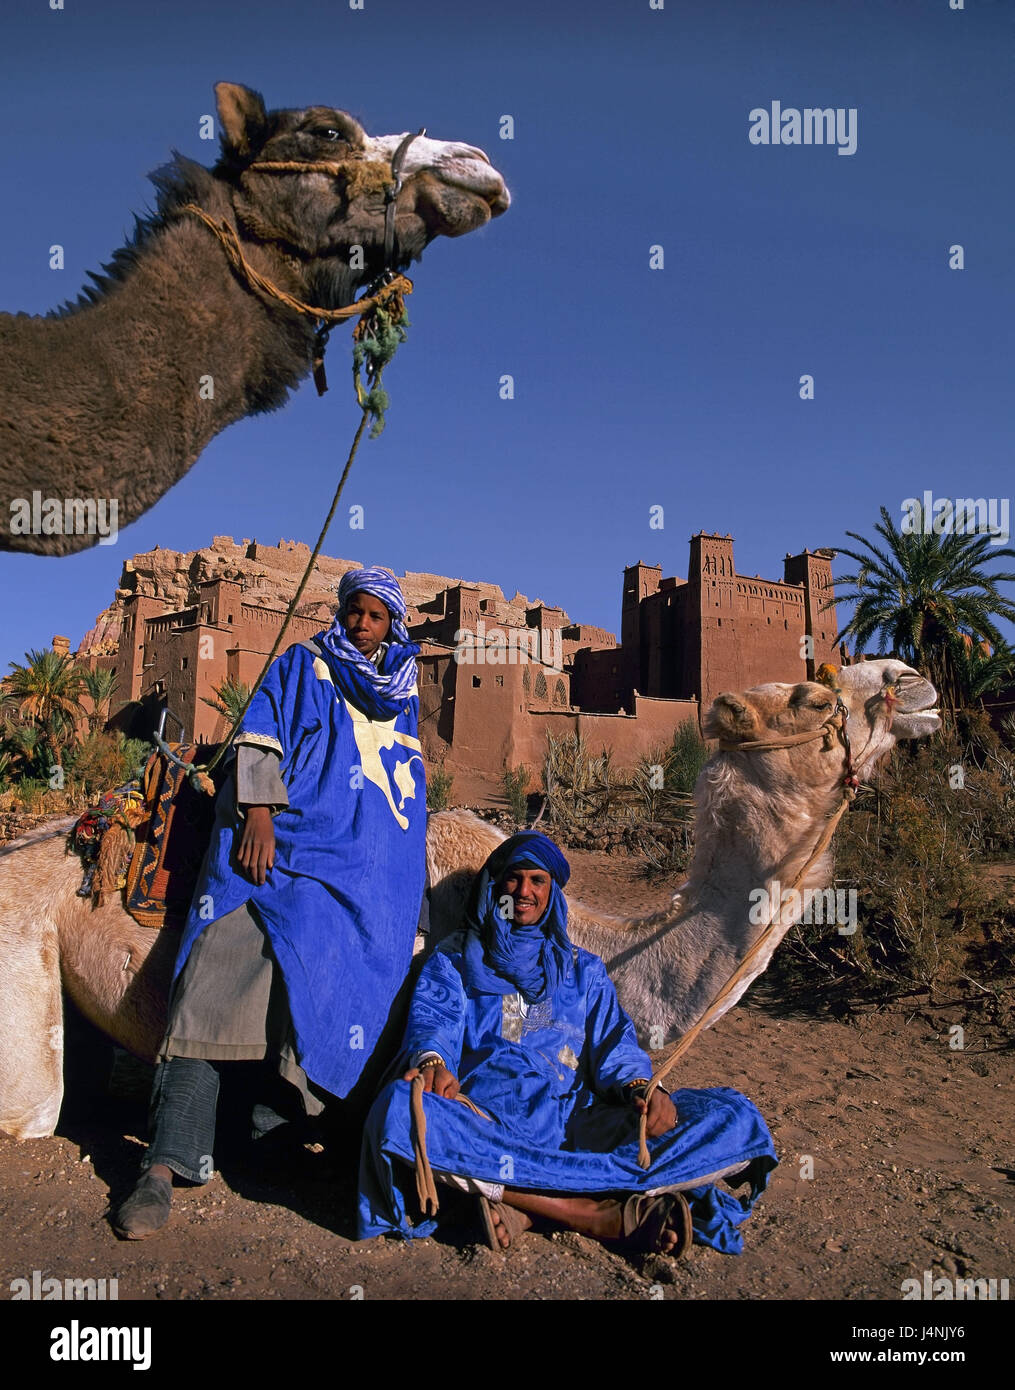 Morocco, Ksar Ait-Ben-Haddou, men, camels, Africa, North Africa, the Atlas Mountains, person, animals, locals, Moroccans, riding animals, kasbah, mucky building, mucky construction method, traditionally, place of interest, Stock Photo